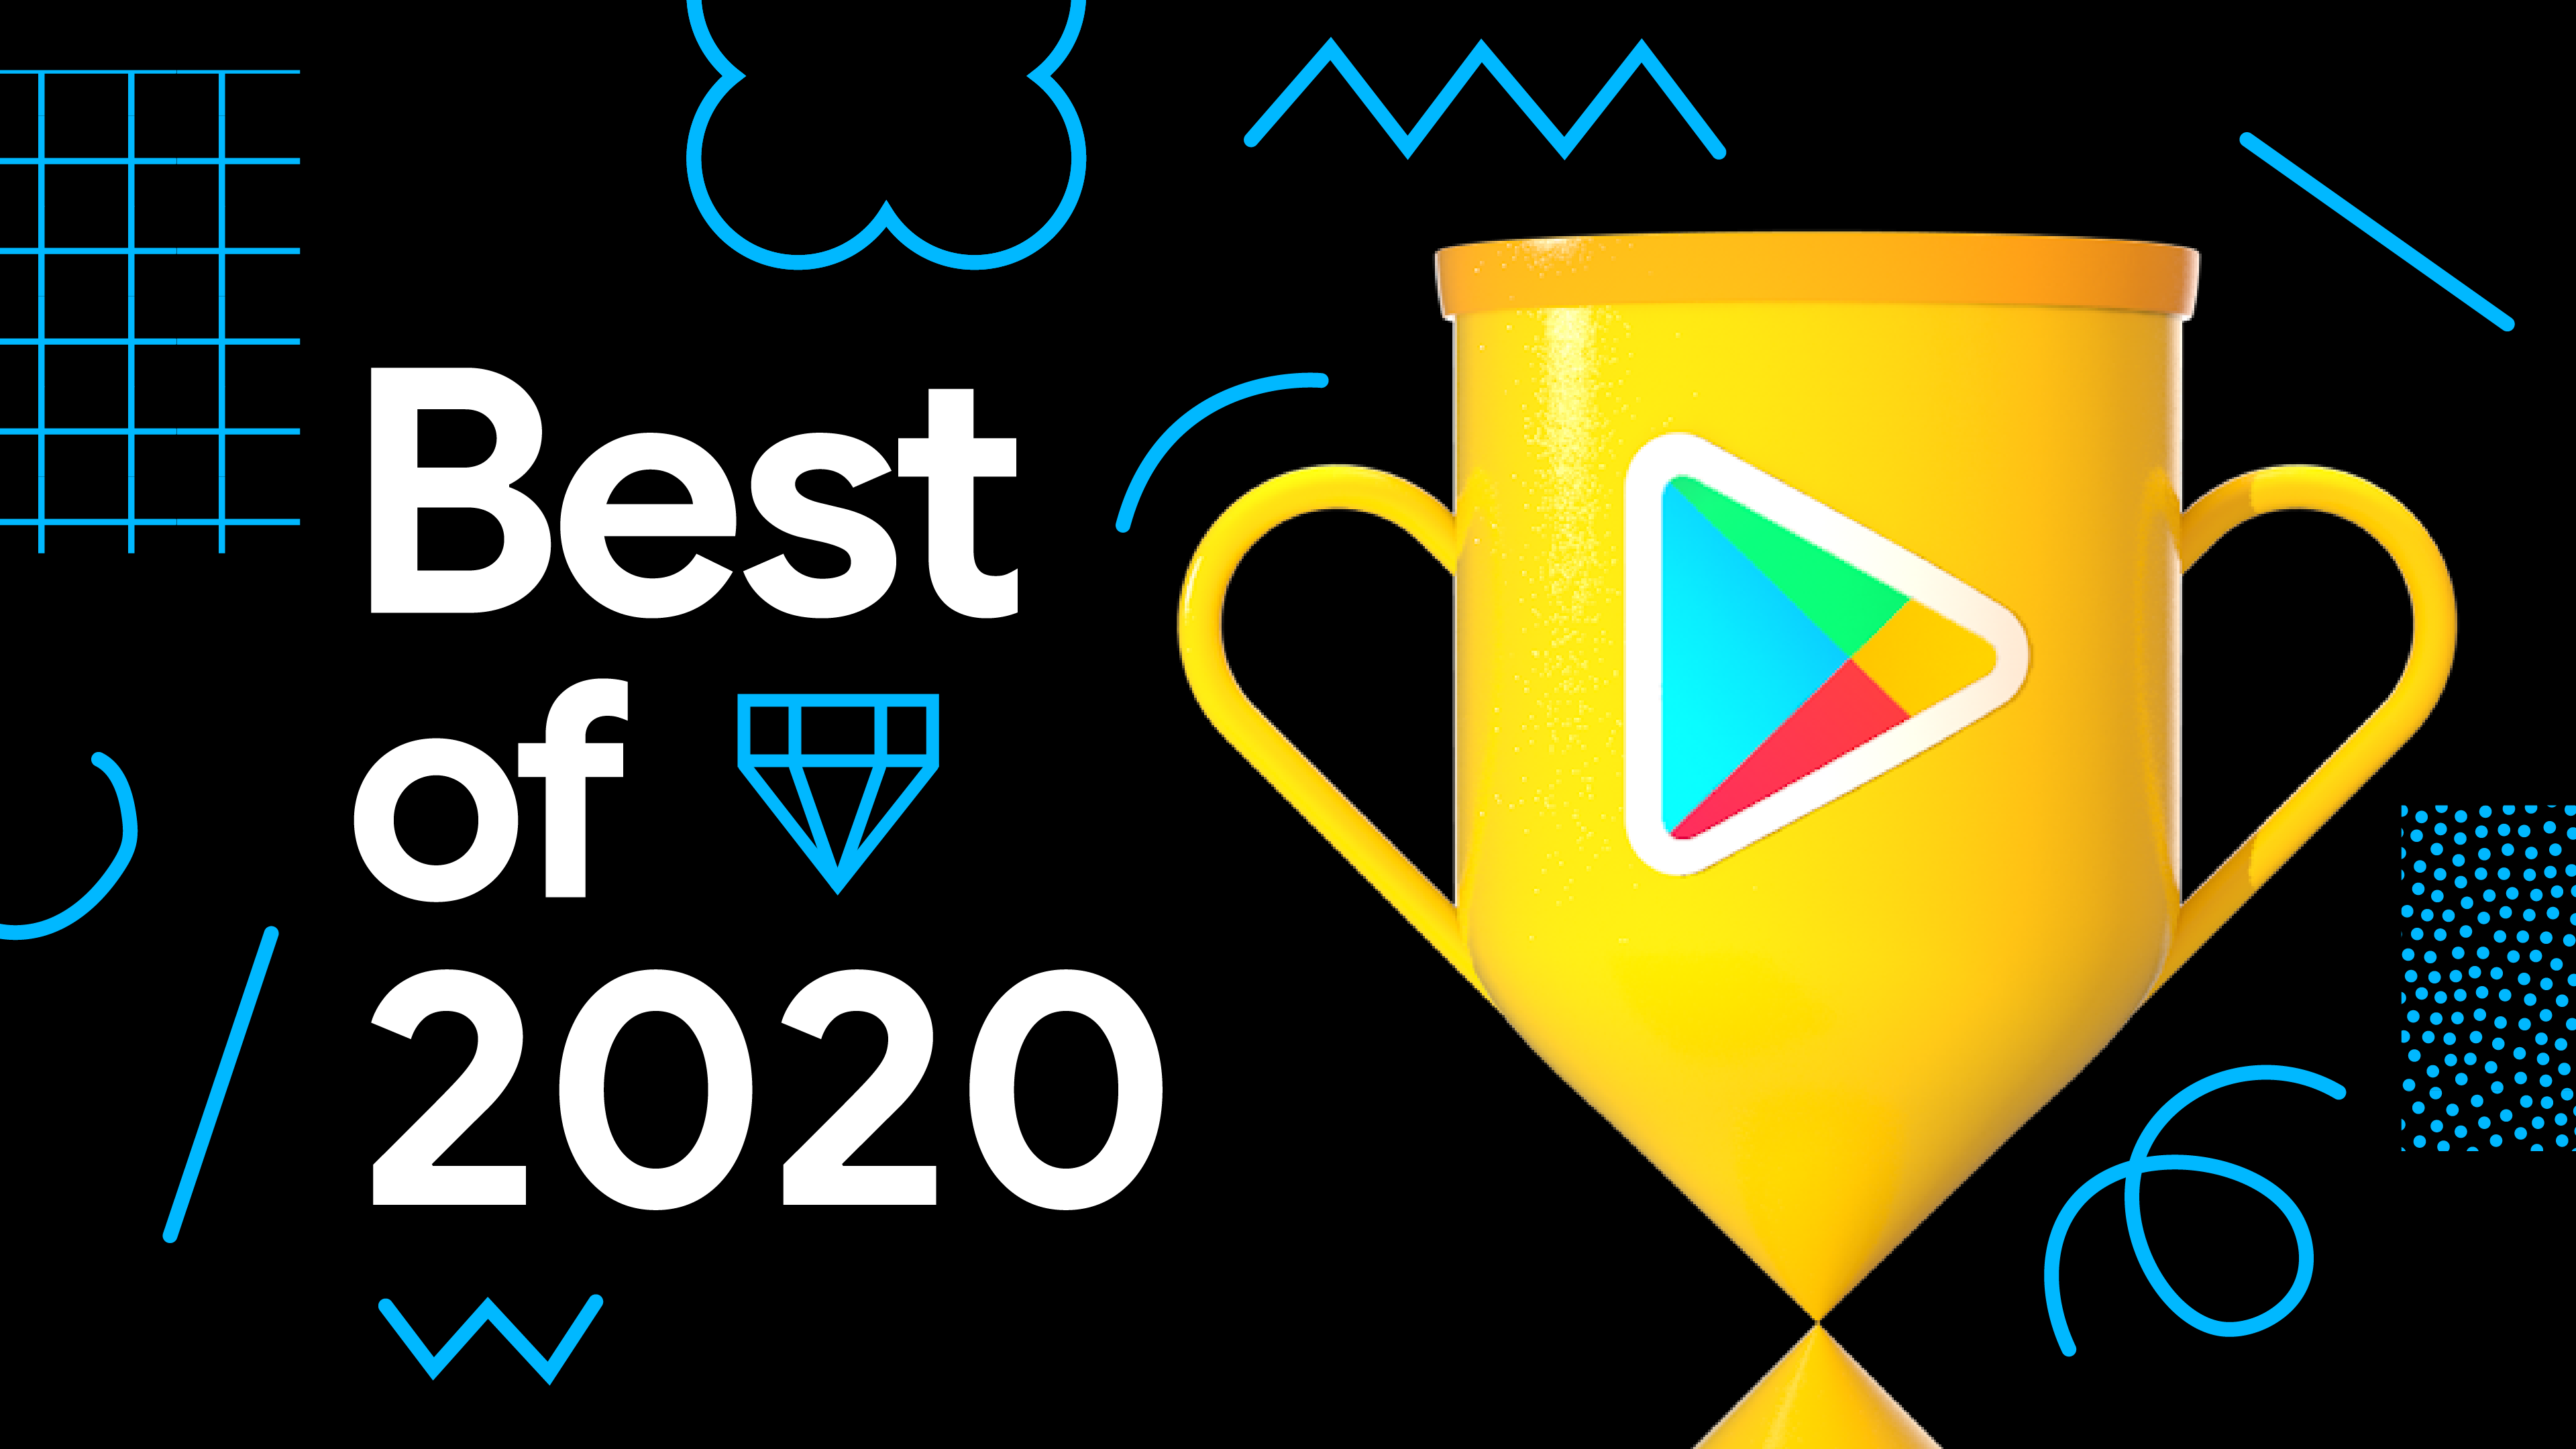 fingeraftryk Immunitet fodspor Google Play Store lists best Android apps and games of 2020